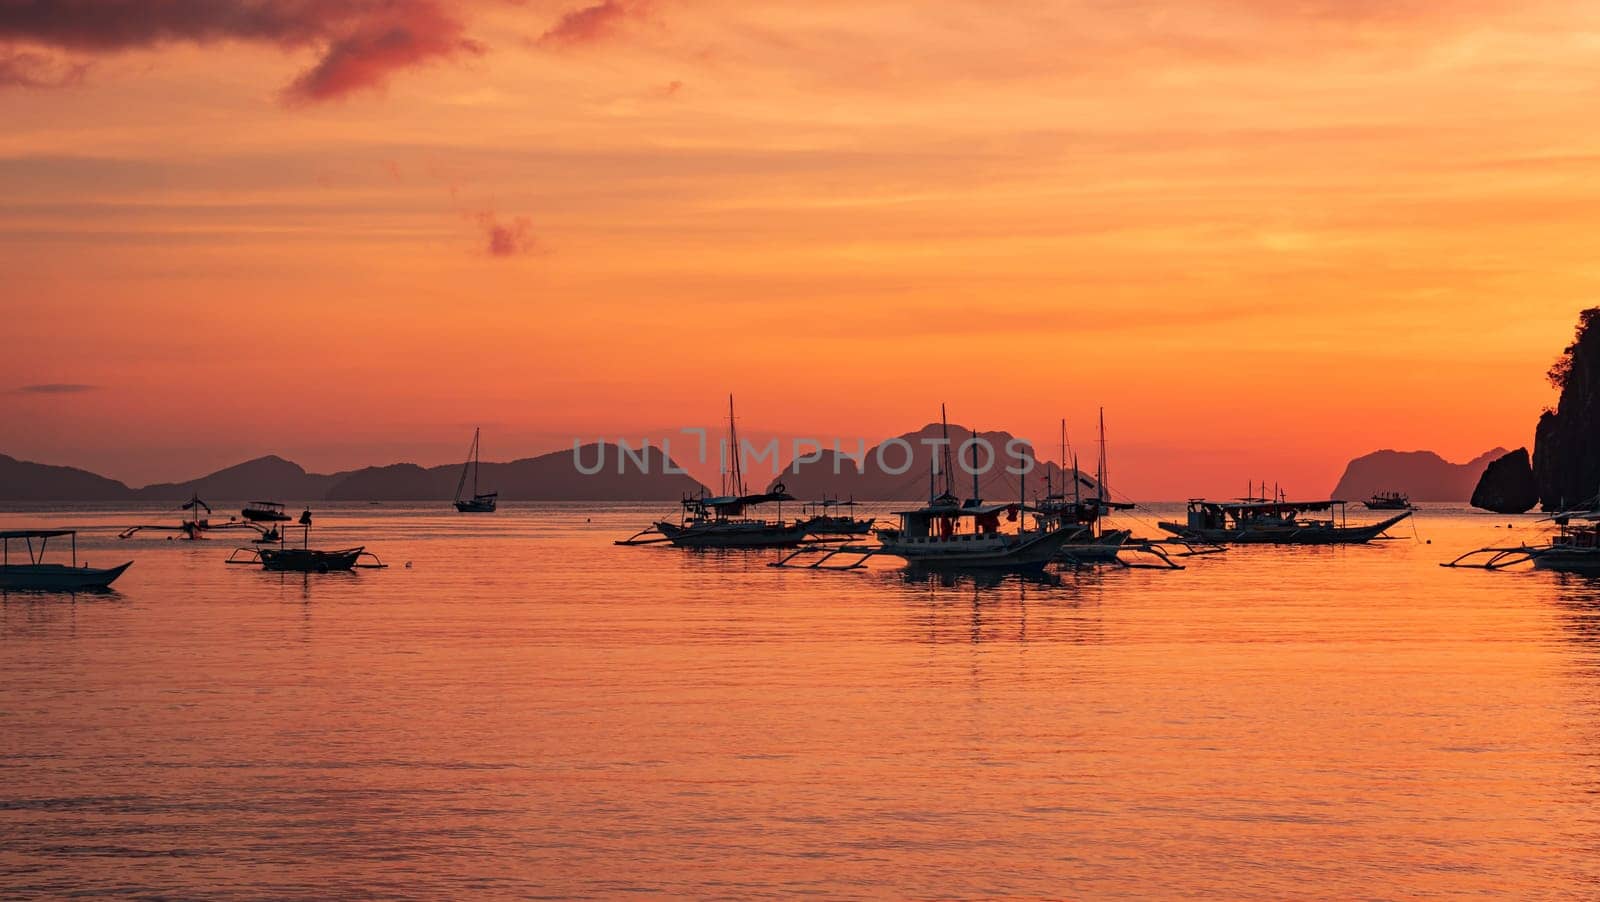 Traditional philippine boat bangka at sunset time. Beautiful sunset with silhouettes of philippine boats in El Nido, Palawan island, Philippines. by Busker